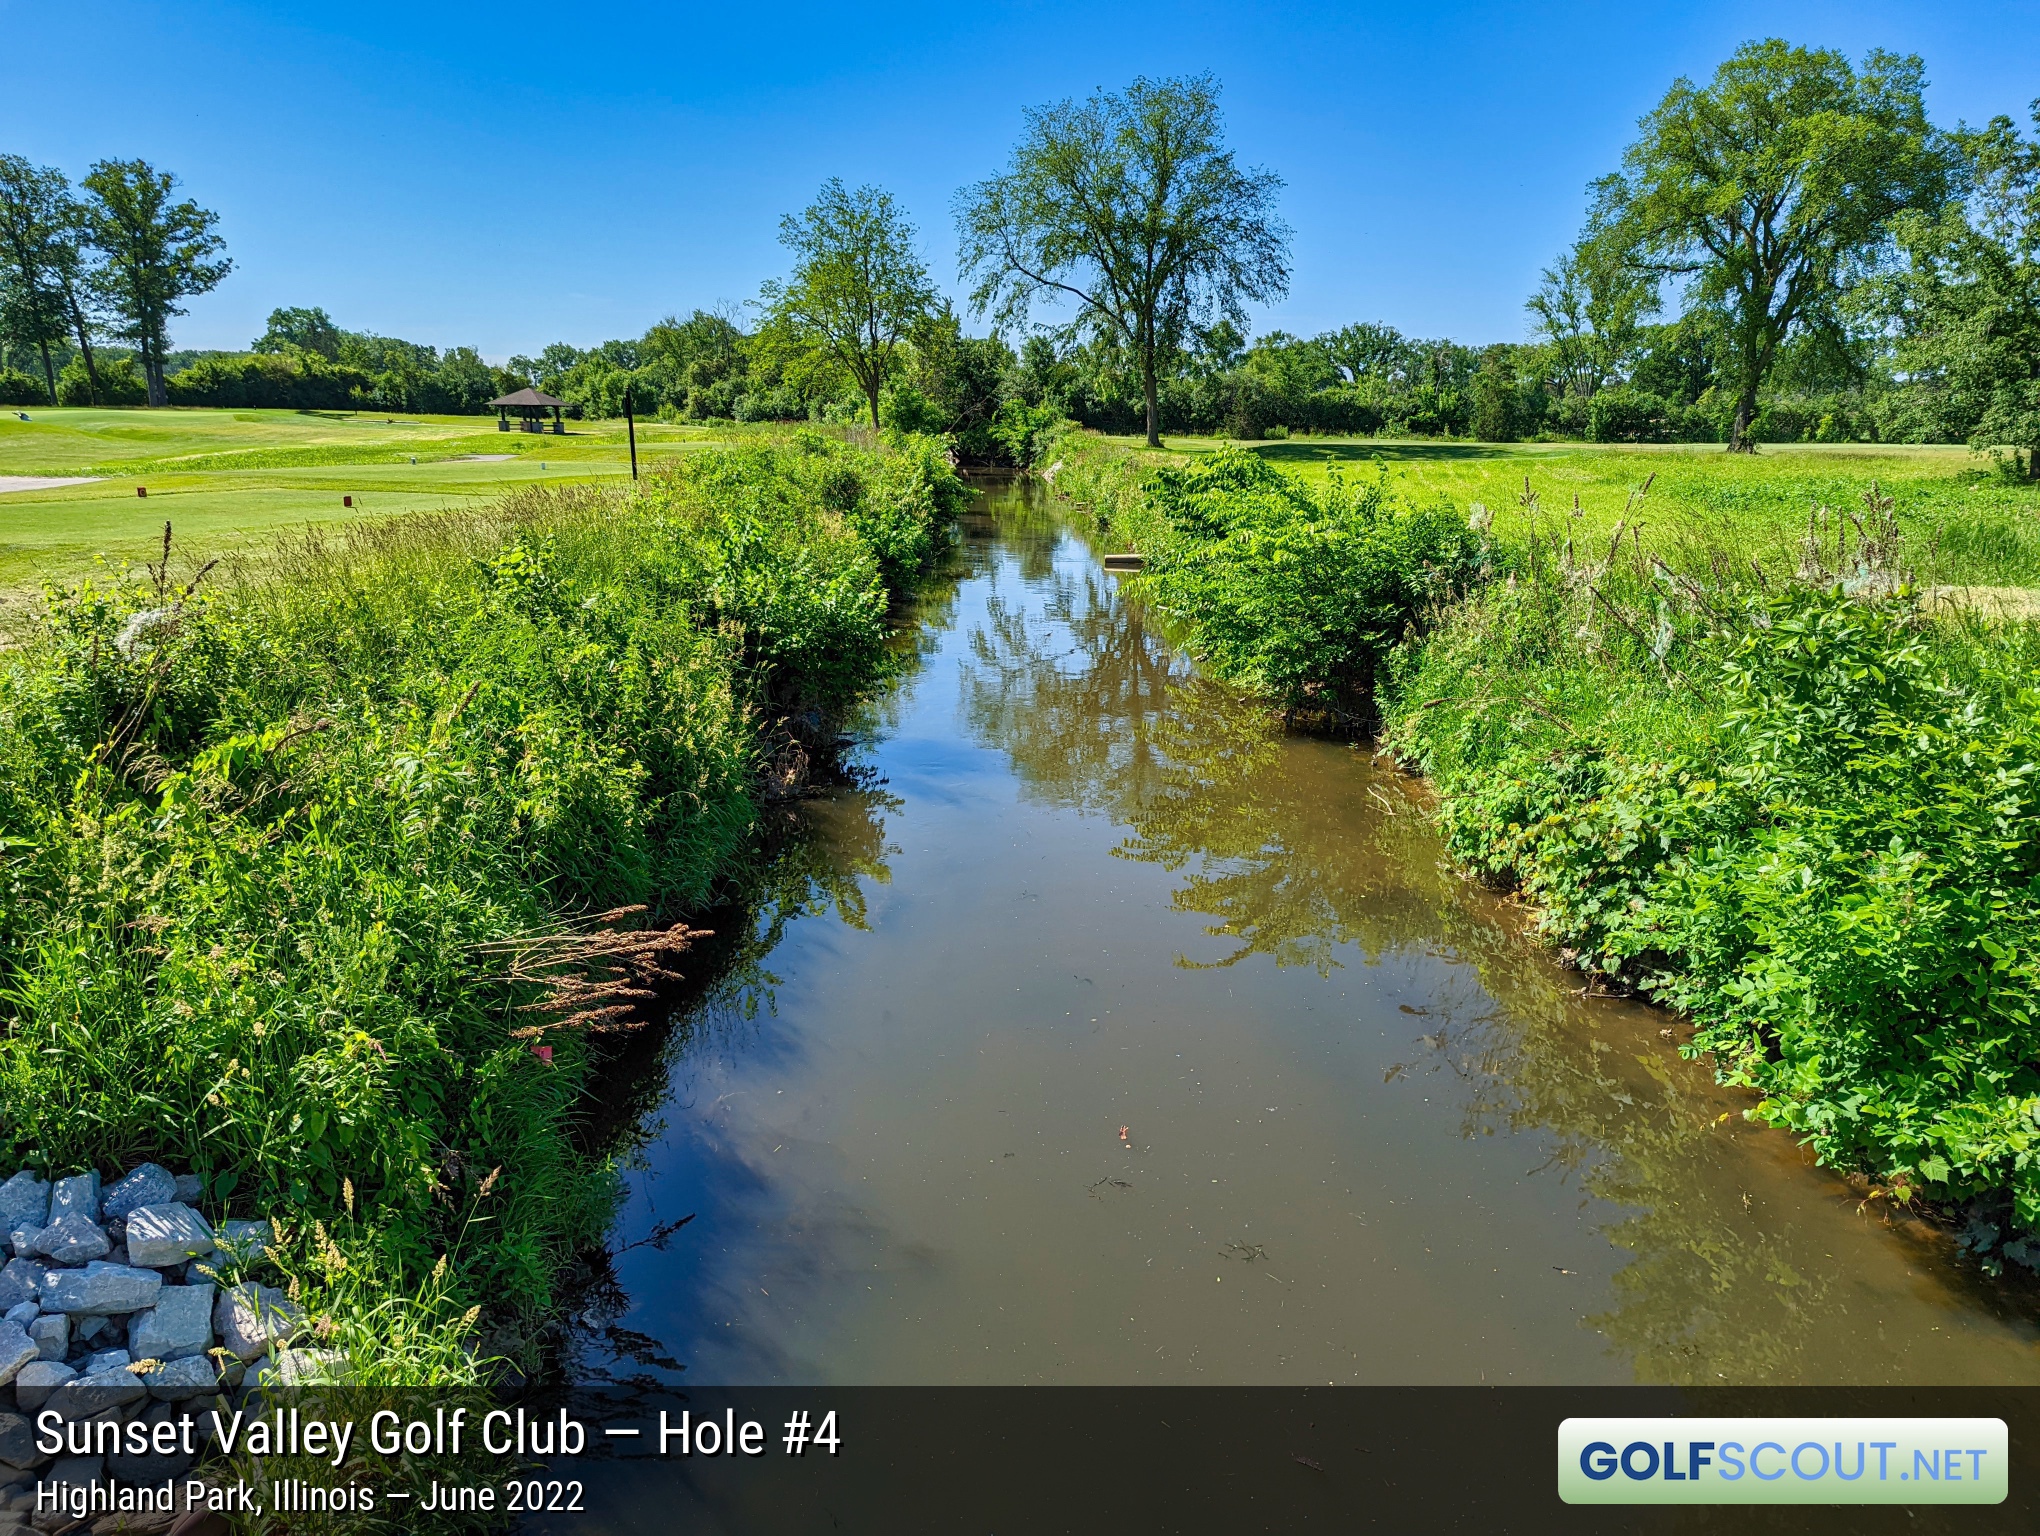 Photo of hole #4 at Sunset Valley Golf Club in Highland Park, Illinois. 